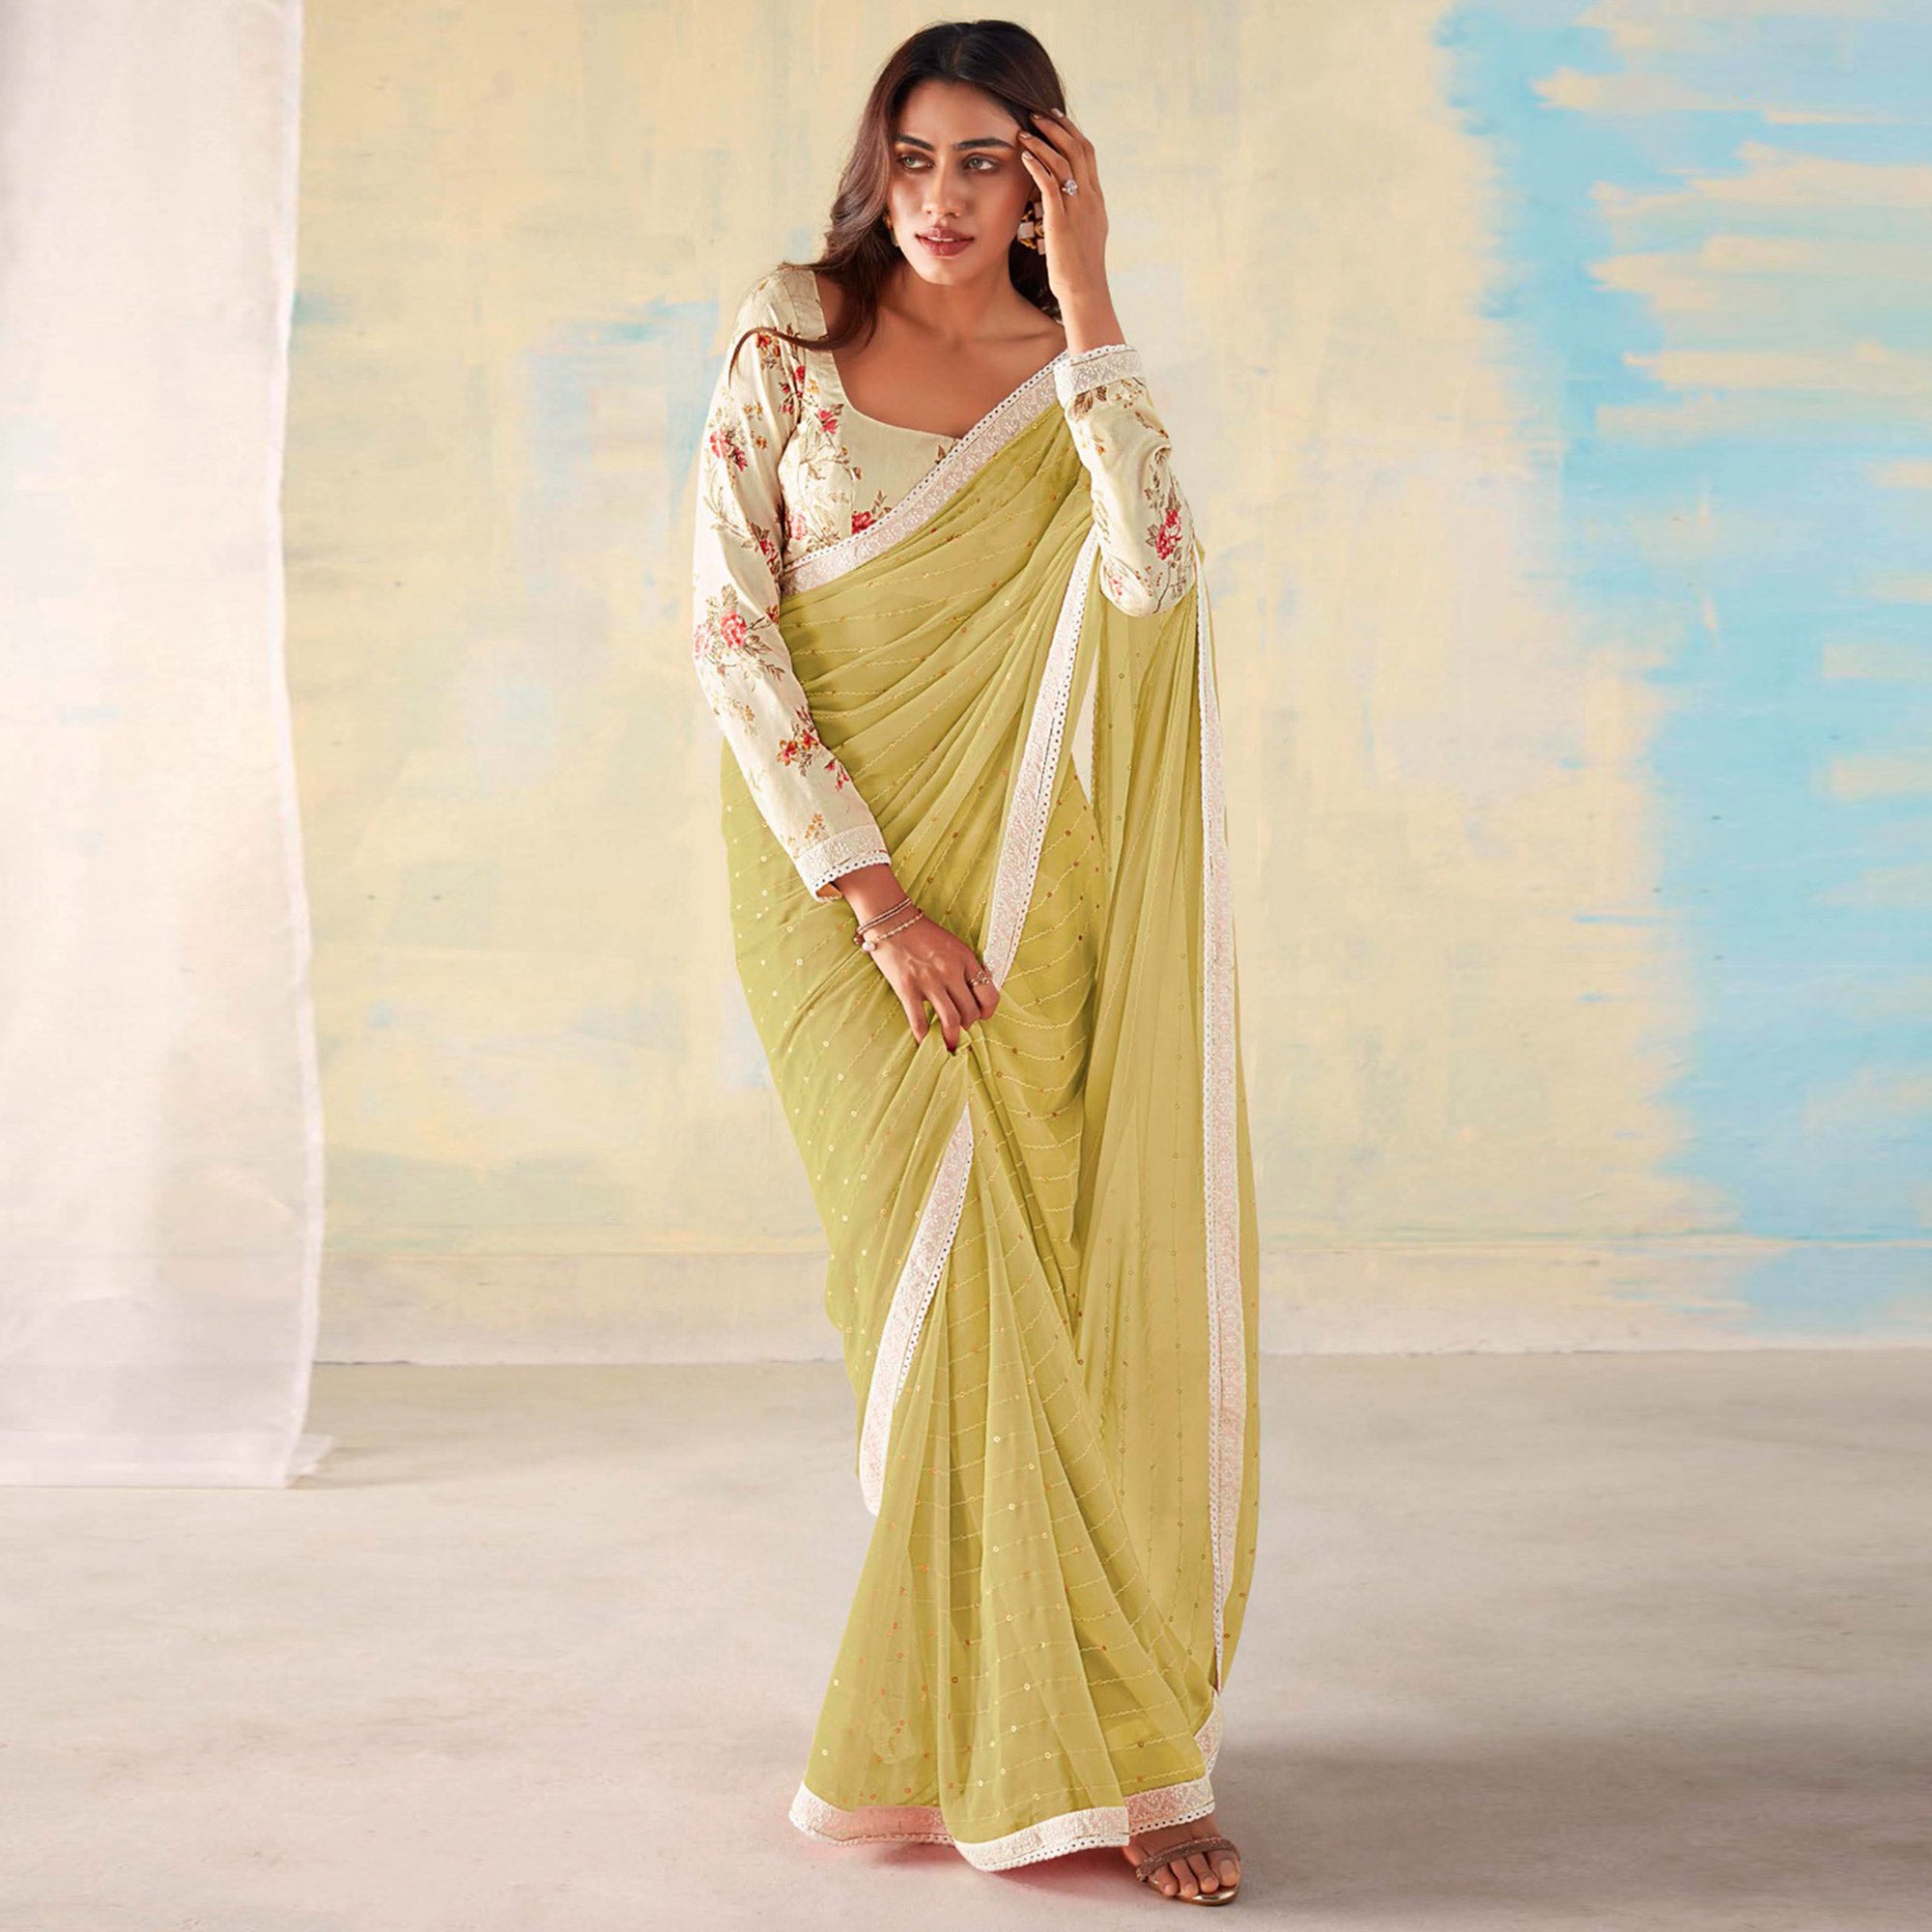 Lemon Yellow Foil Printed Georgette Saree With Embroidered Border